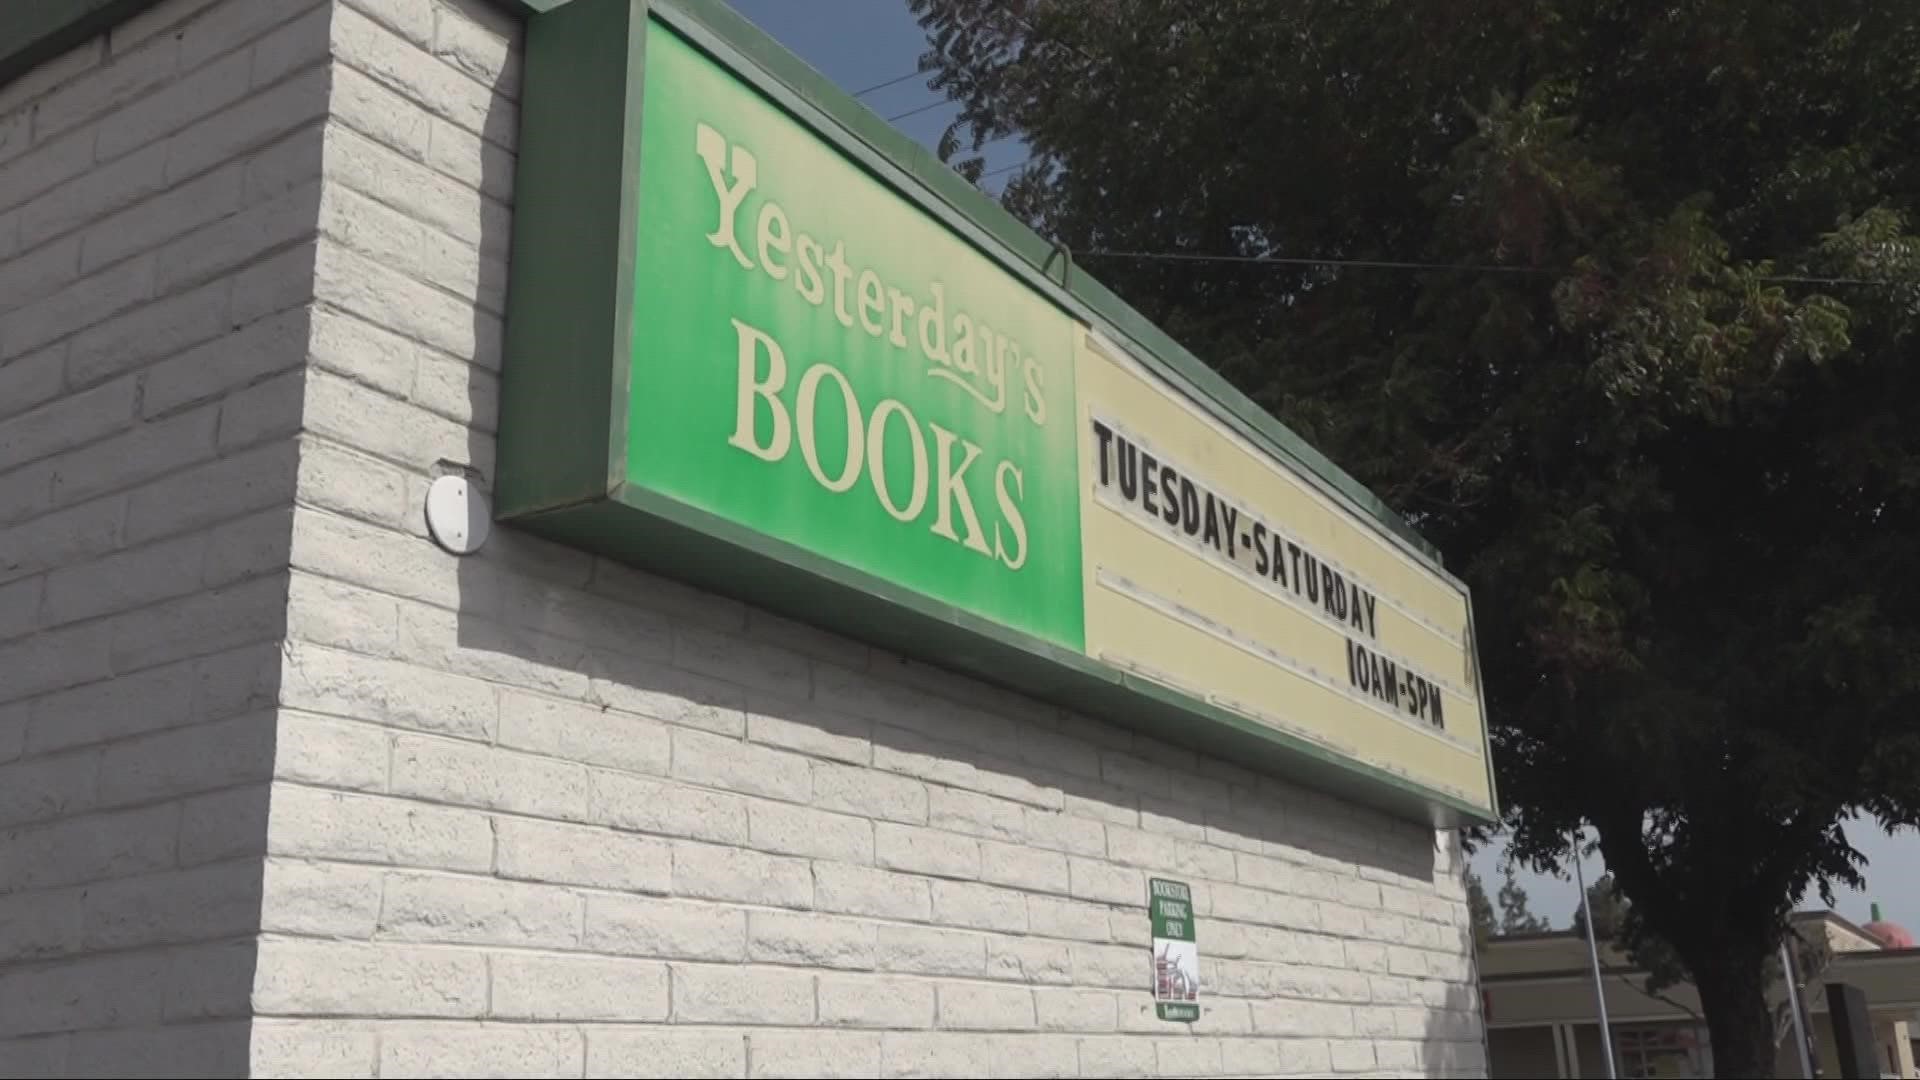 Yesterday's Books has been open since 1980, but the COVID pandemic was too much for the store, resulting in it preparing to close by the end of the year.